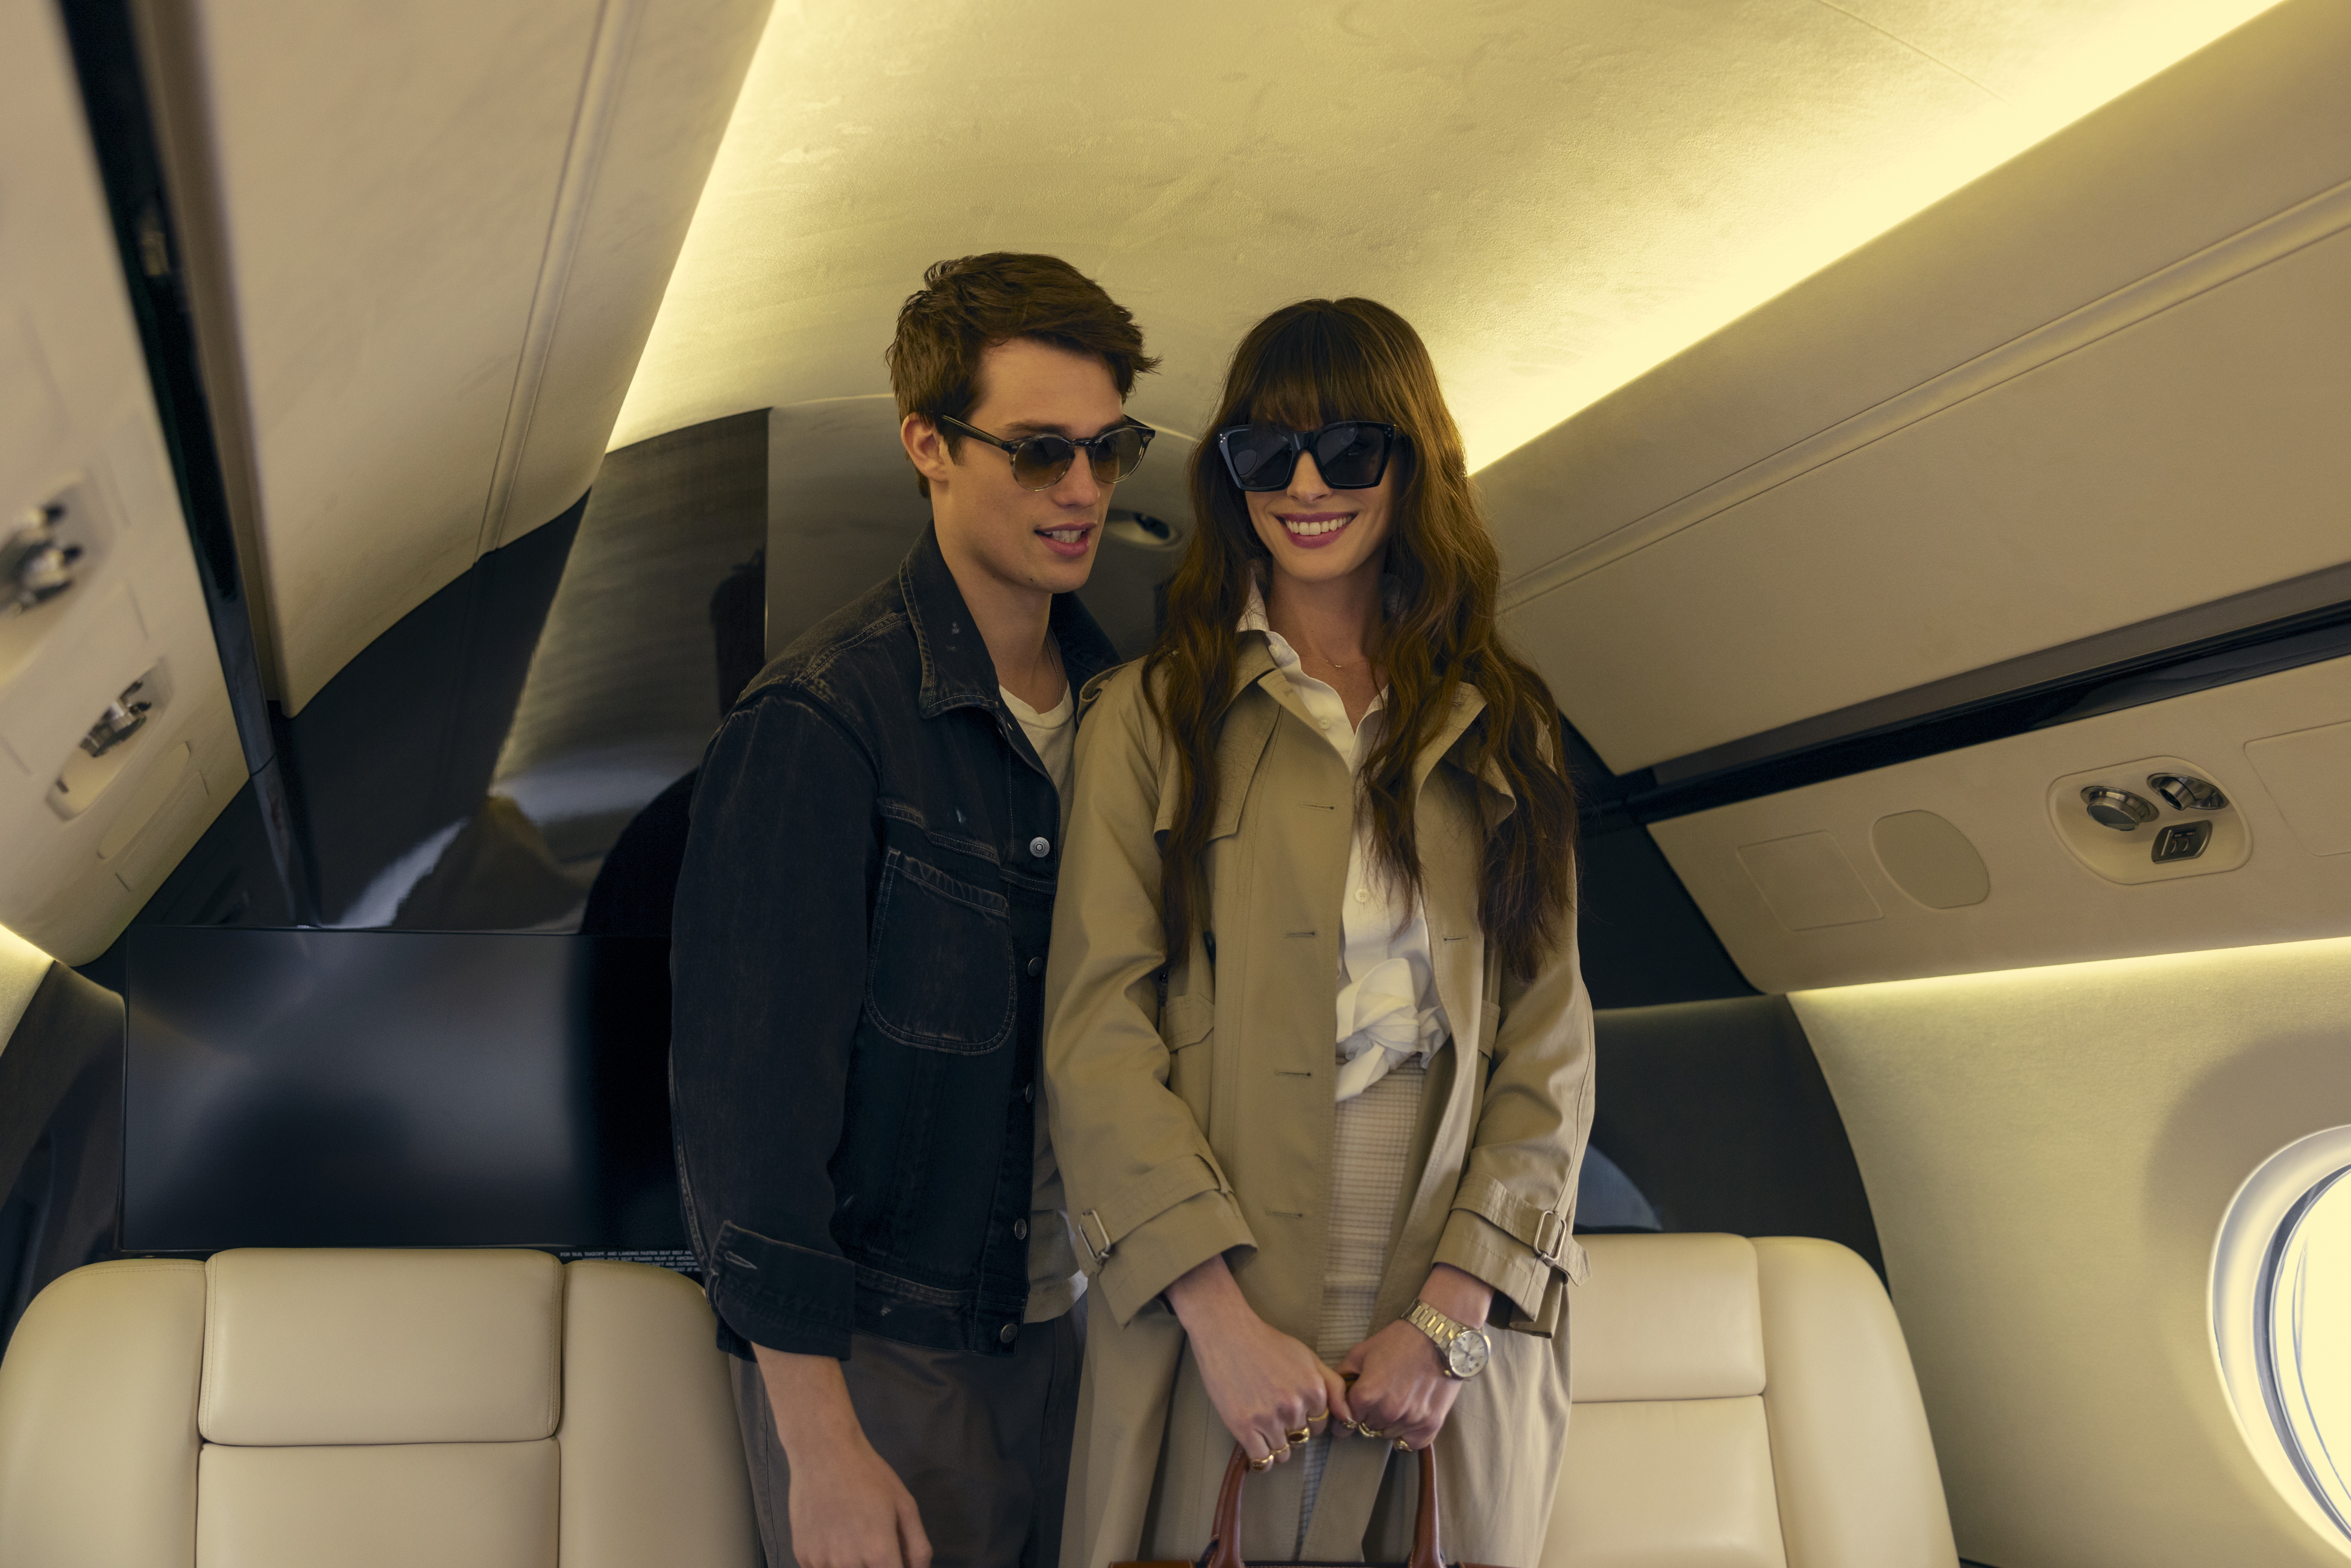 Two people standing inside an airplane cabin, smiling, dressed in casual chic attire